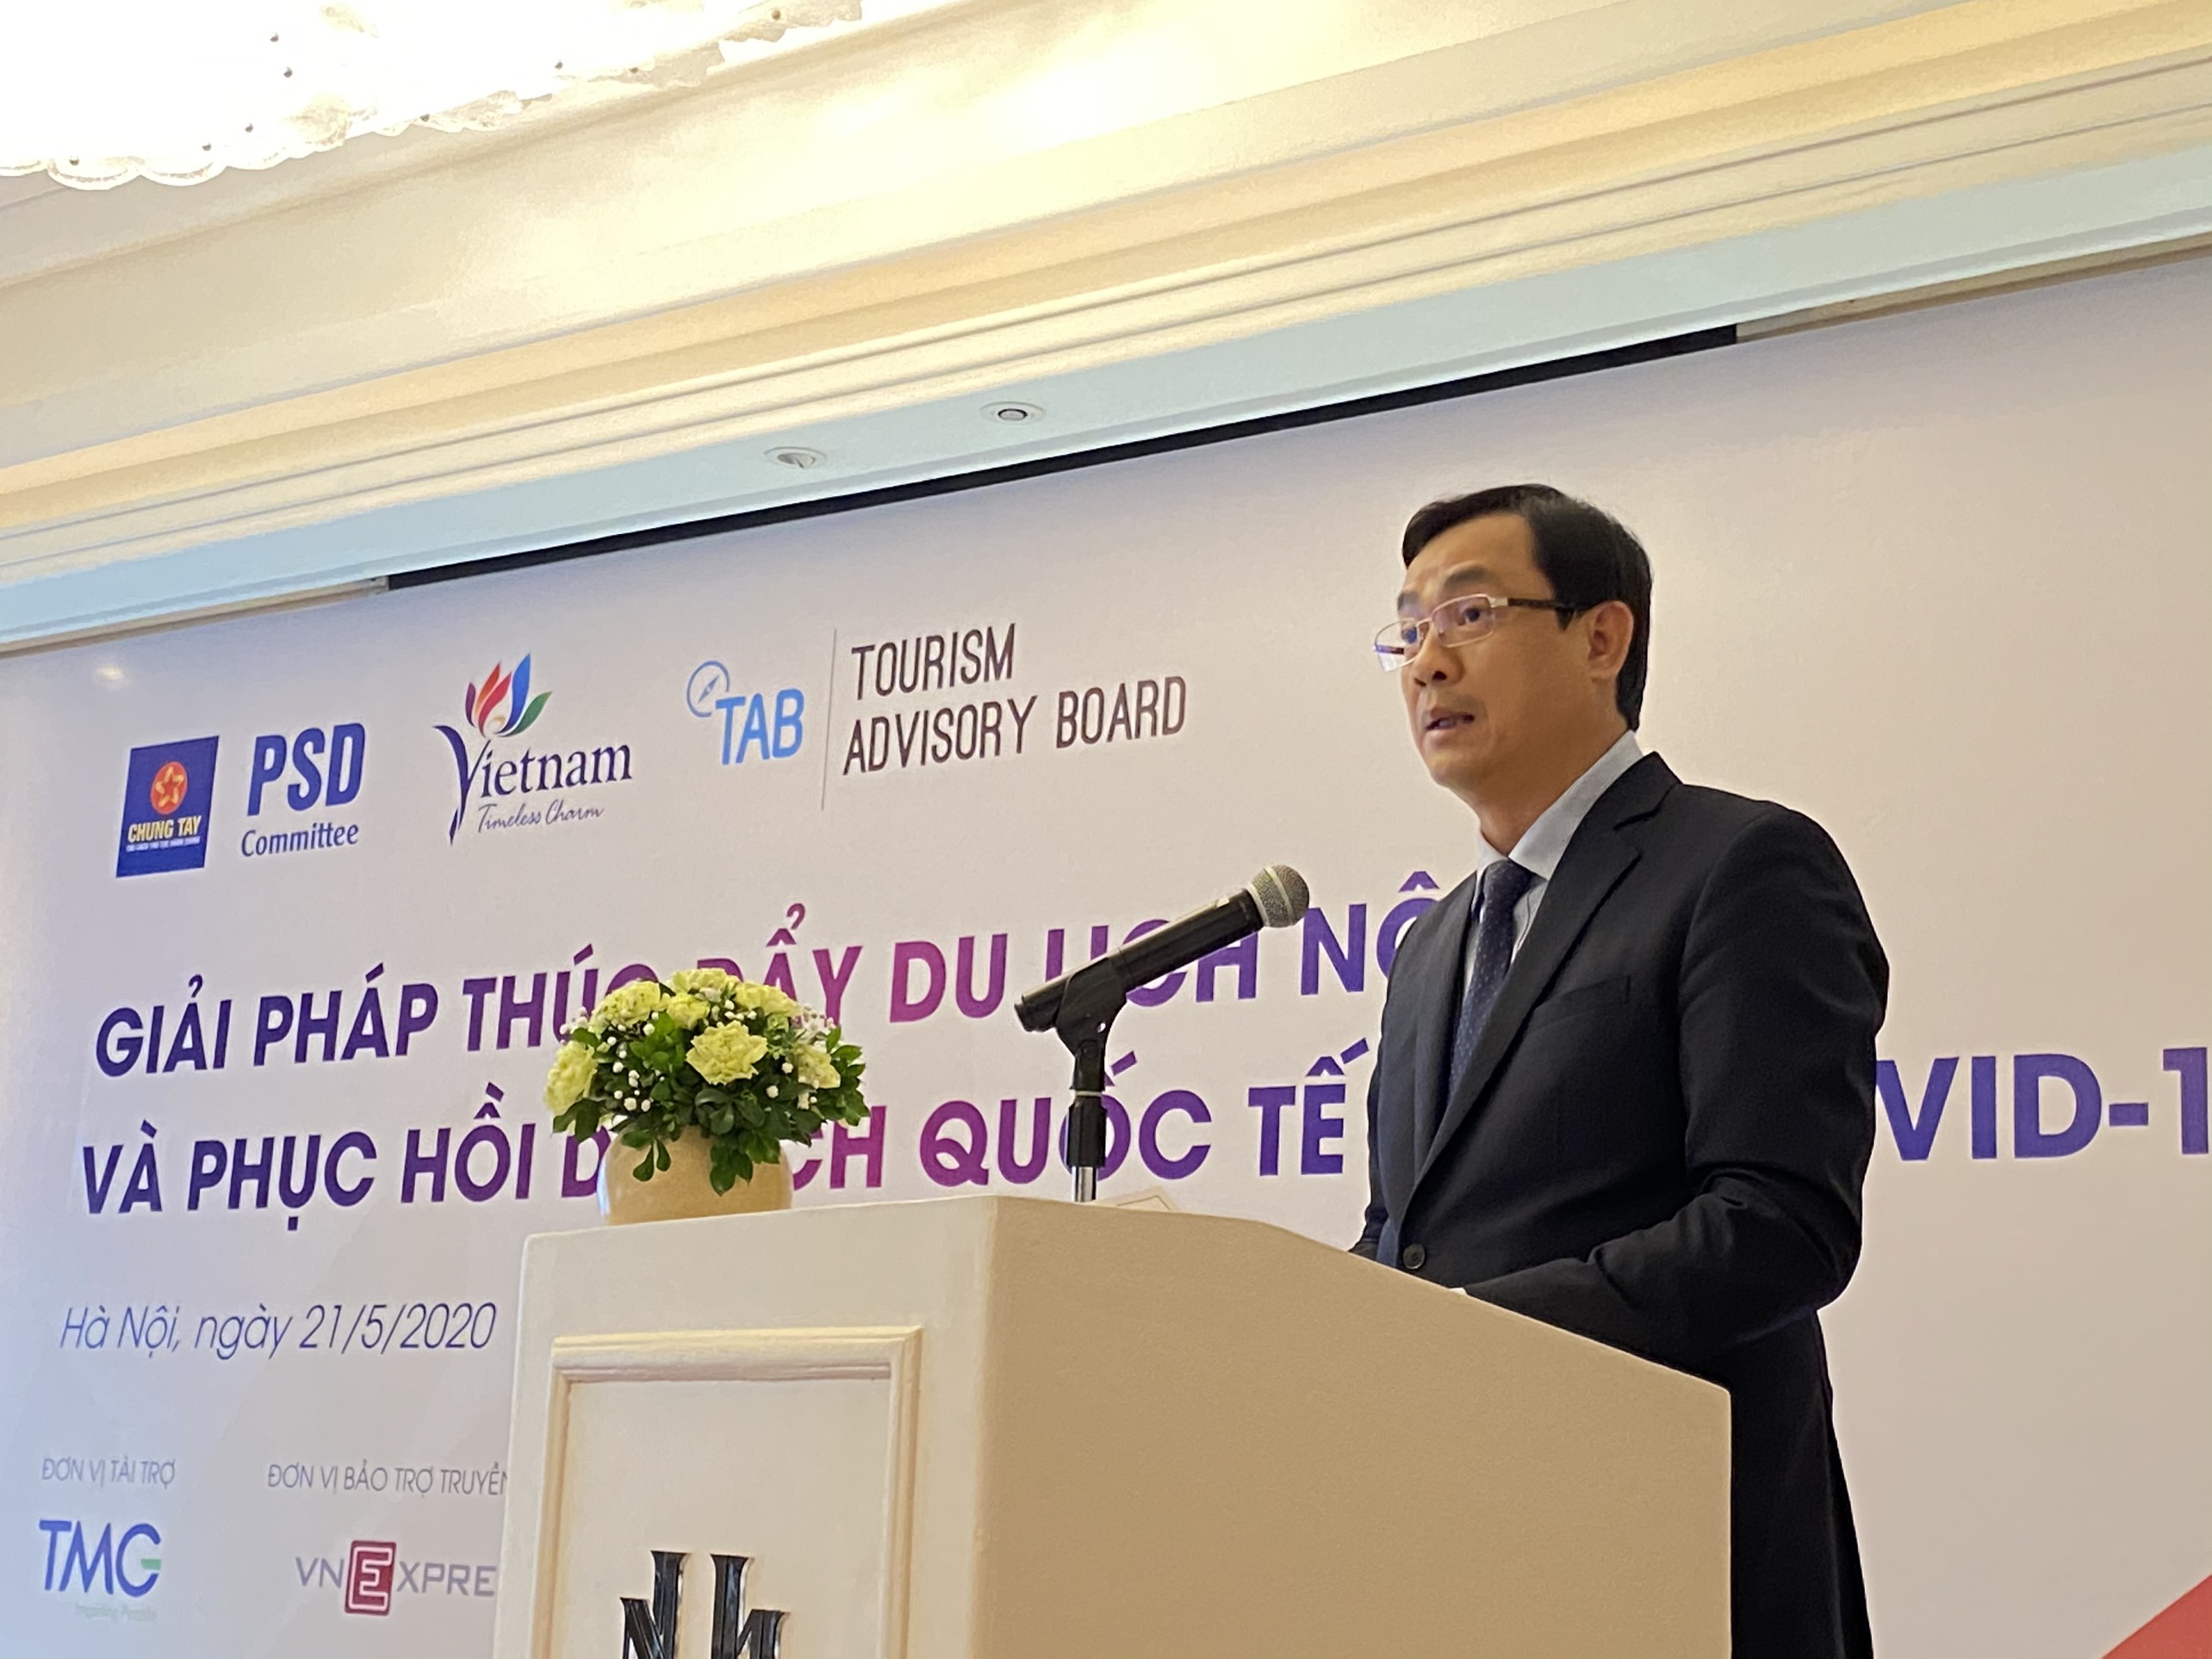 Chairman Nguyen Trung Khanh: Big enterprises need to play a leading role in reviving tourism market